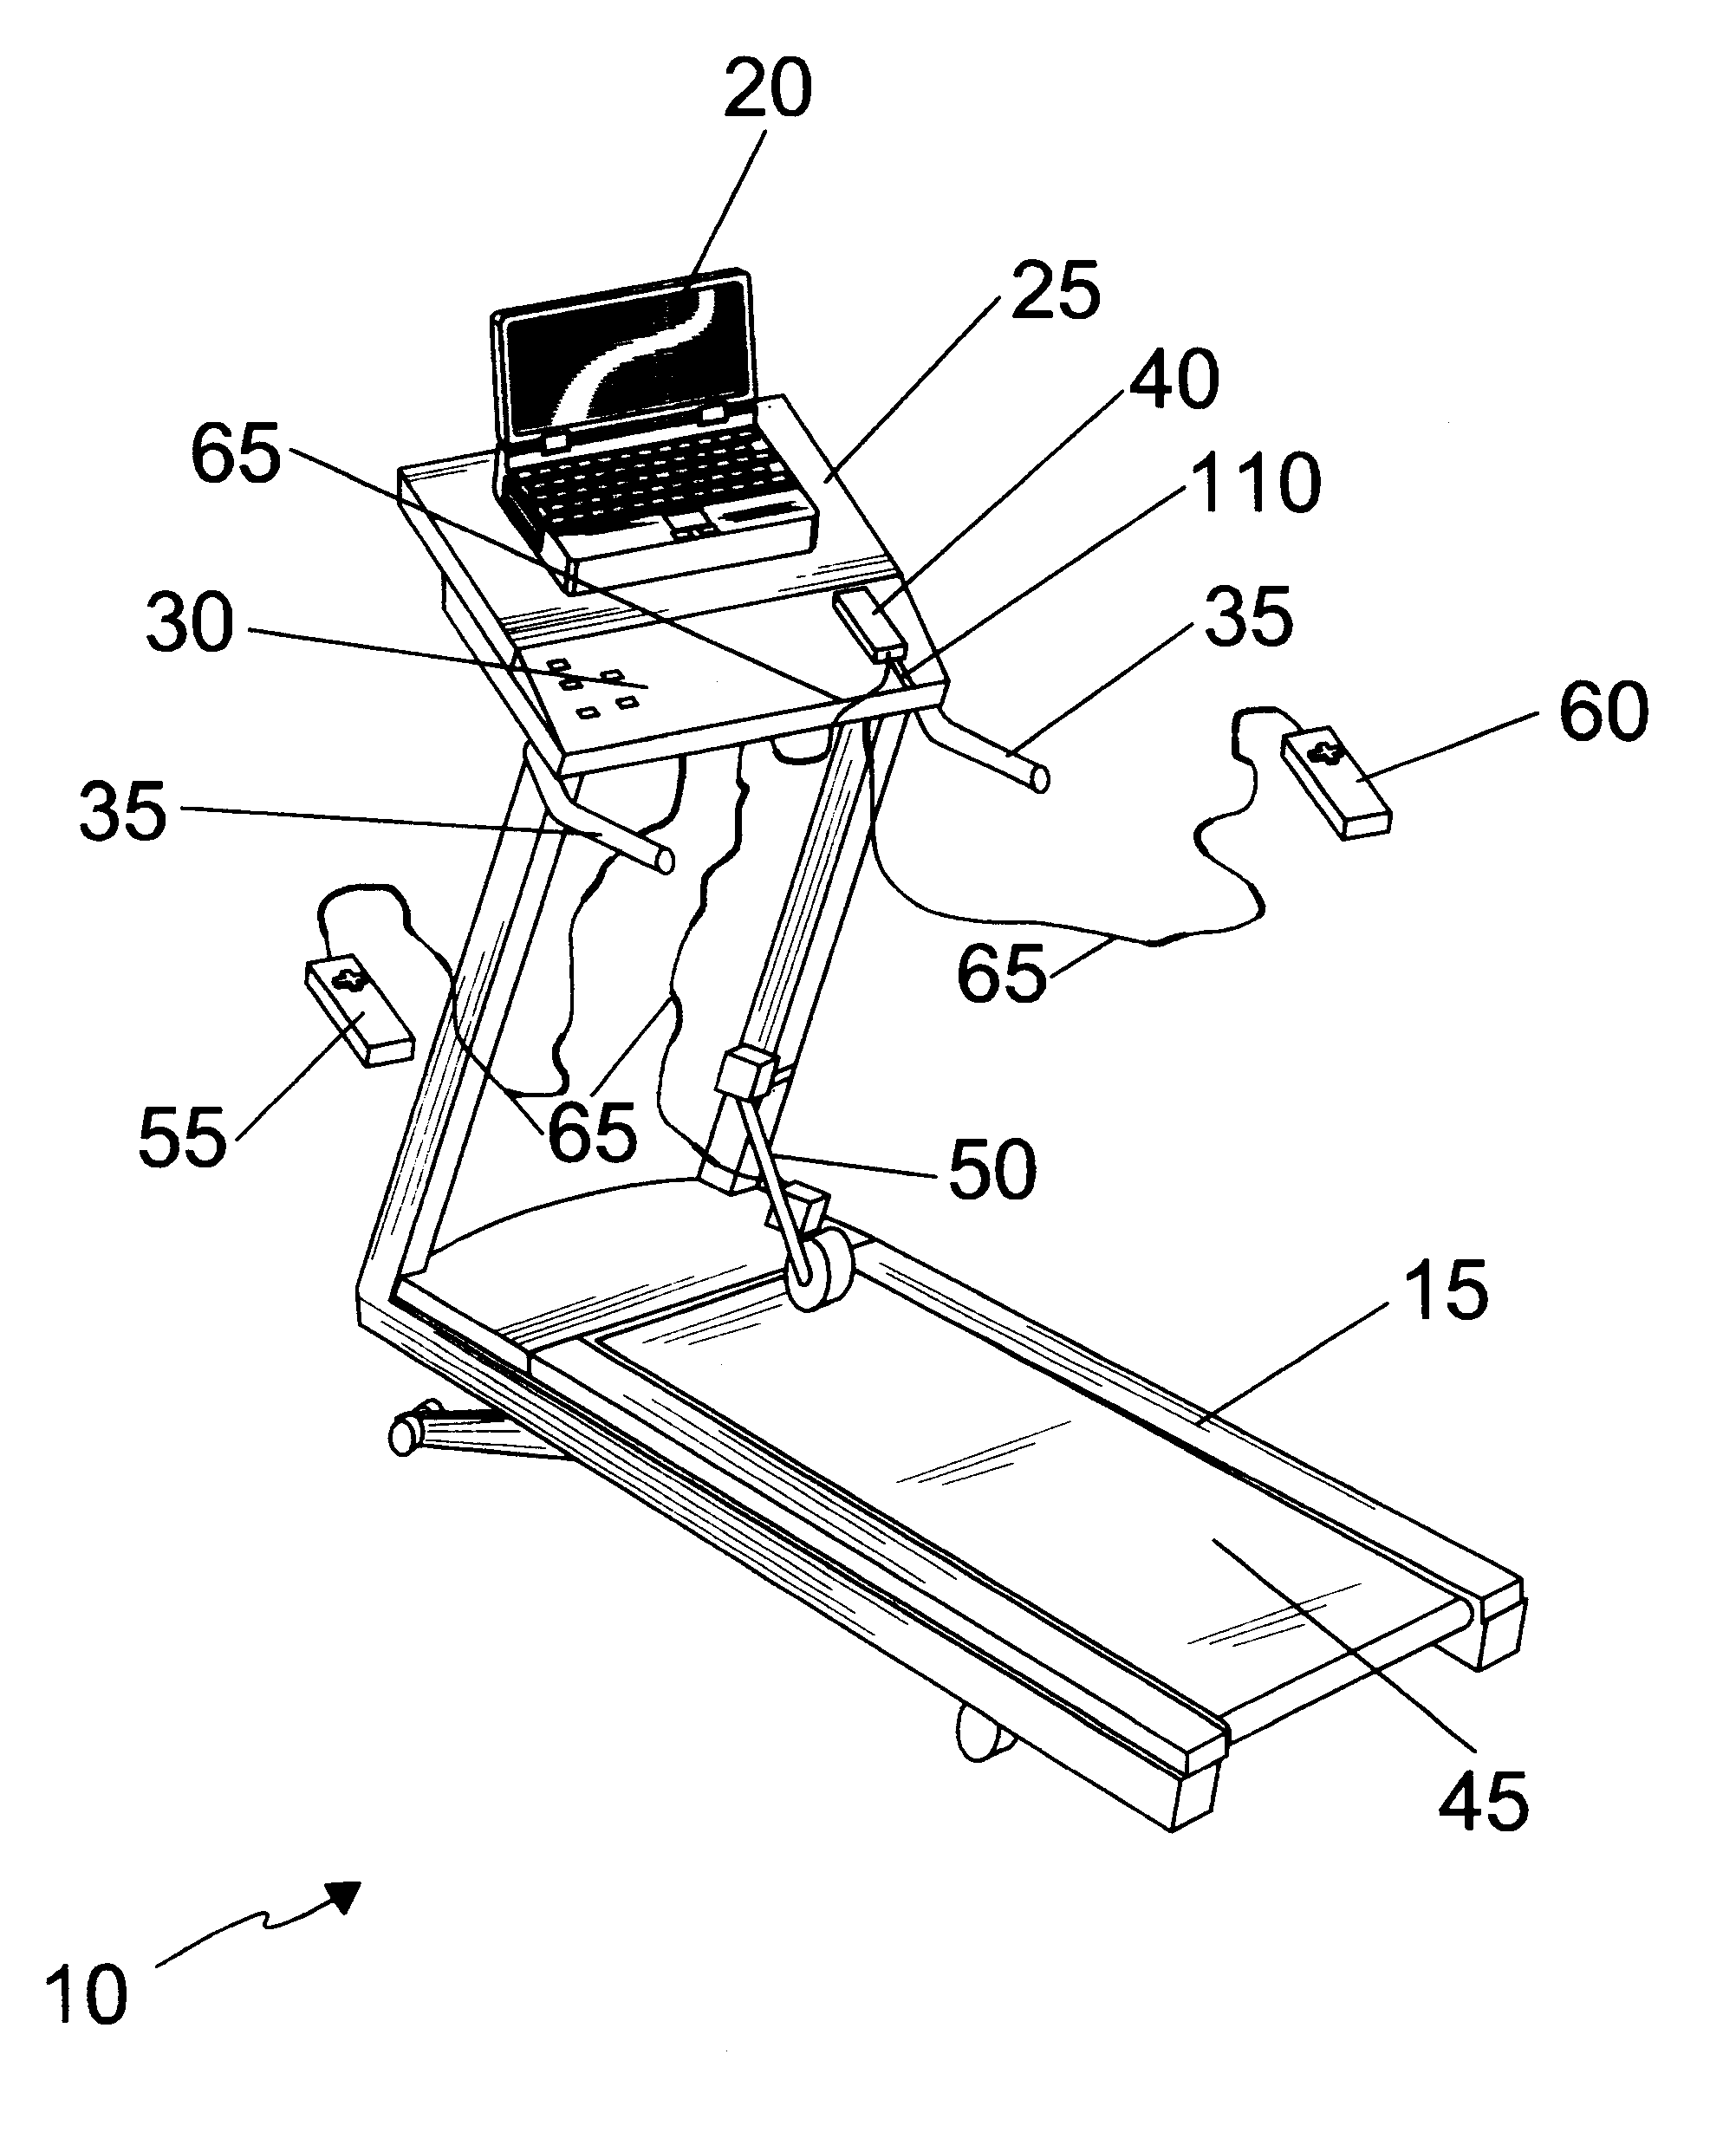 Computer interface with remote communication apparatus for an exercise machine